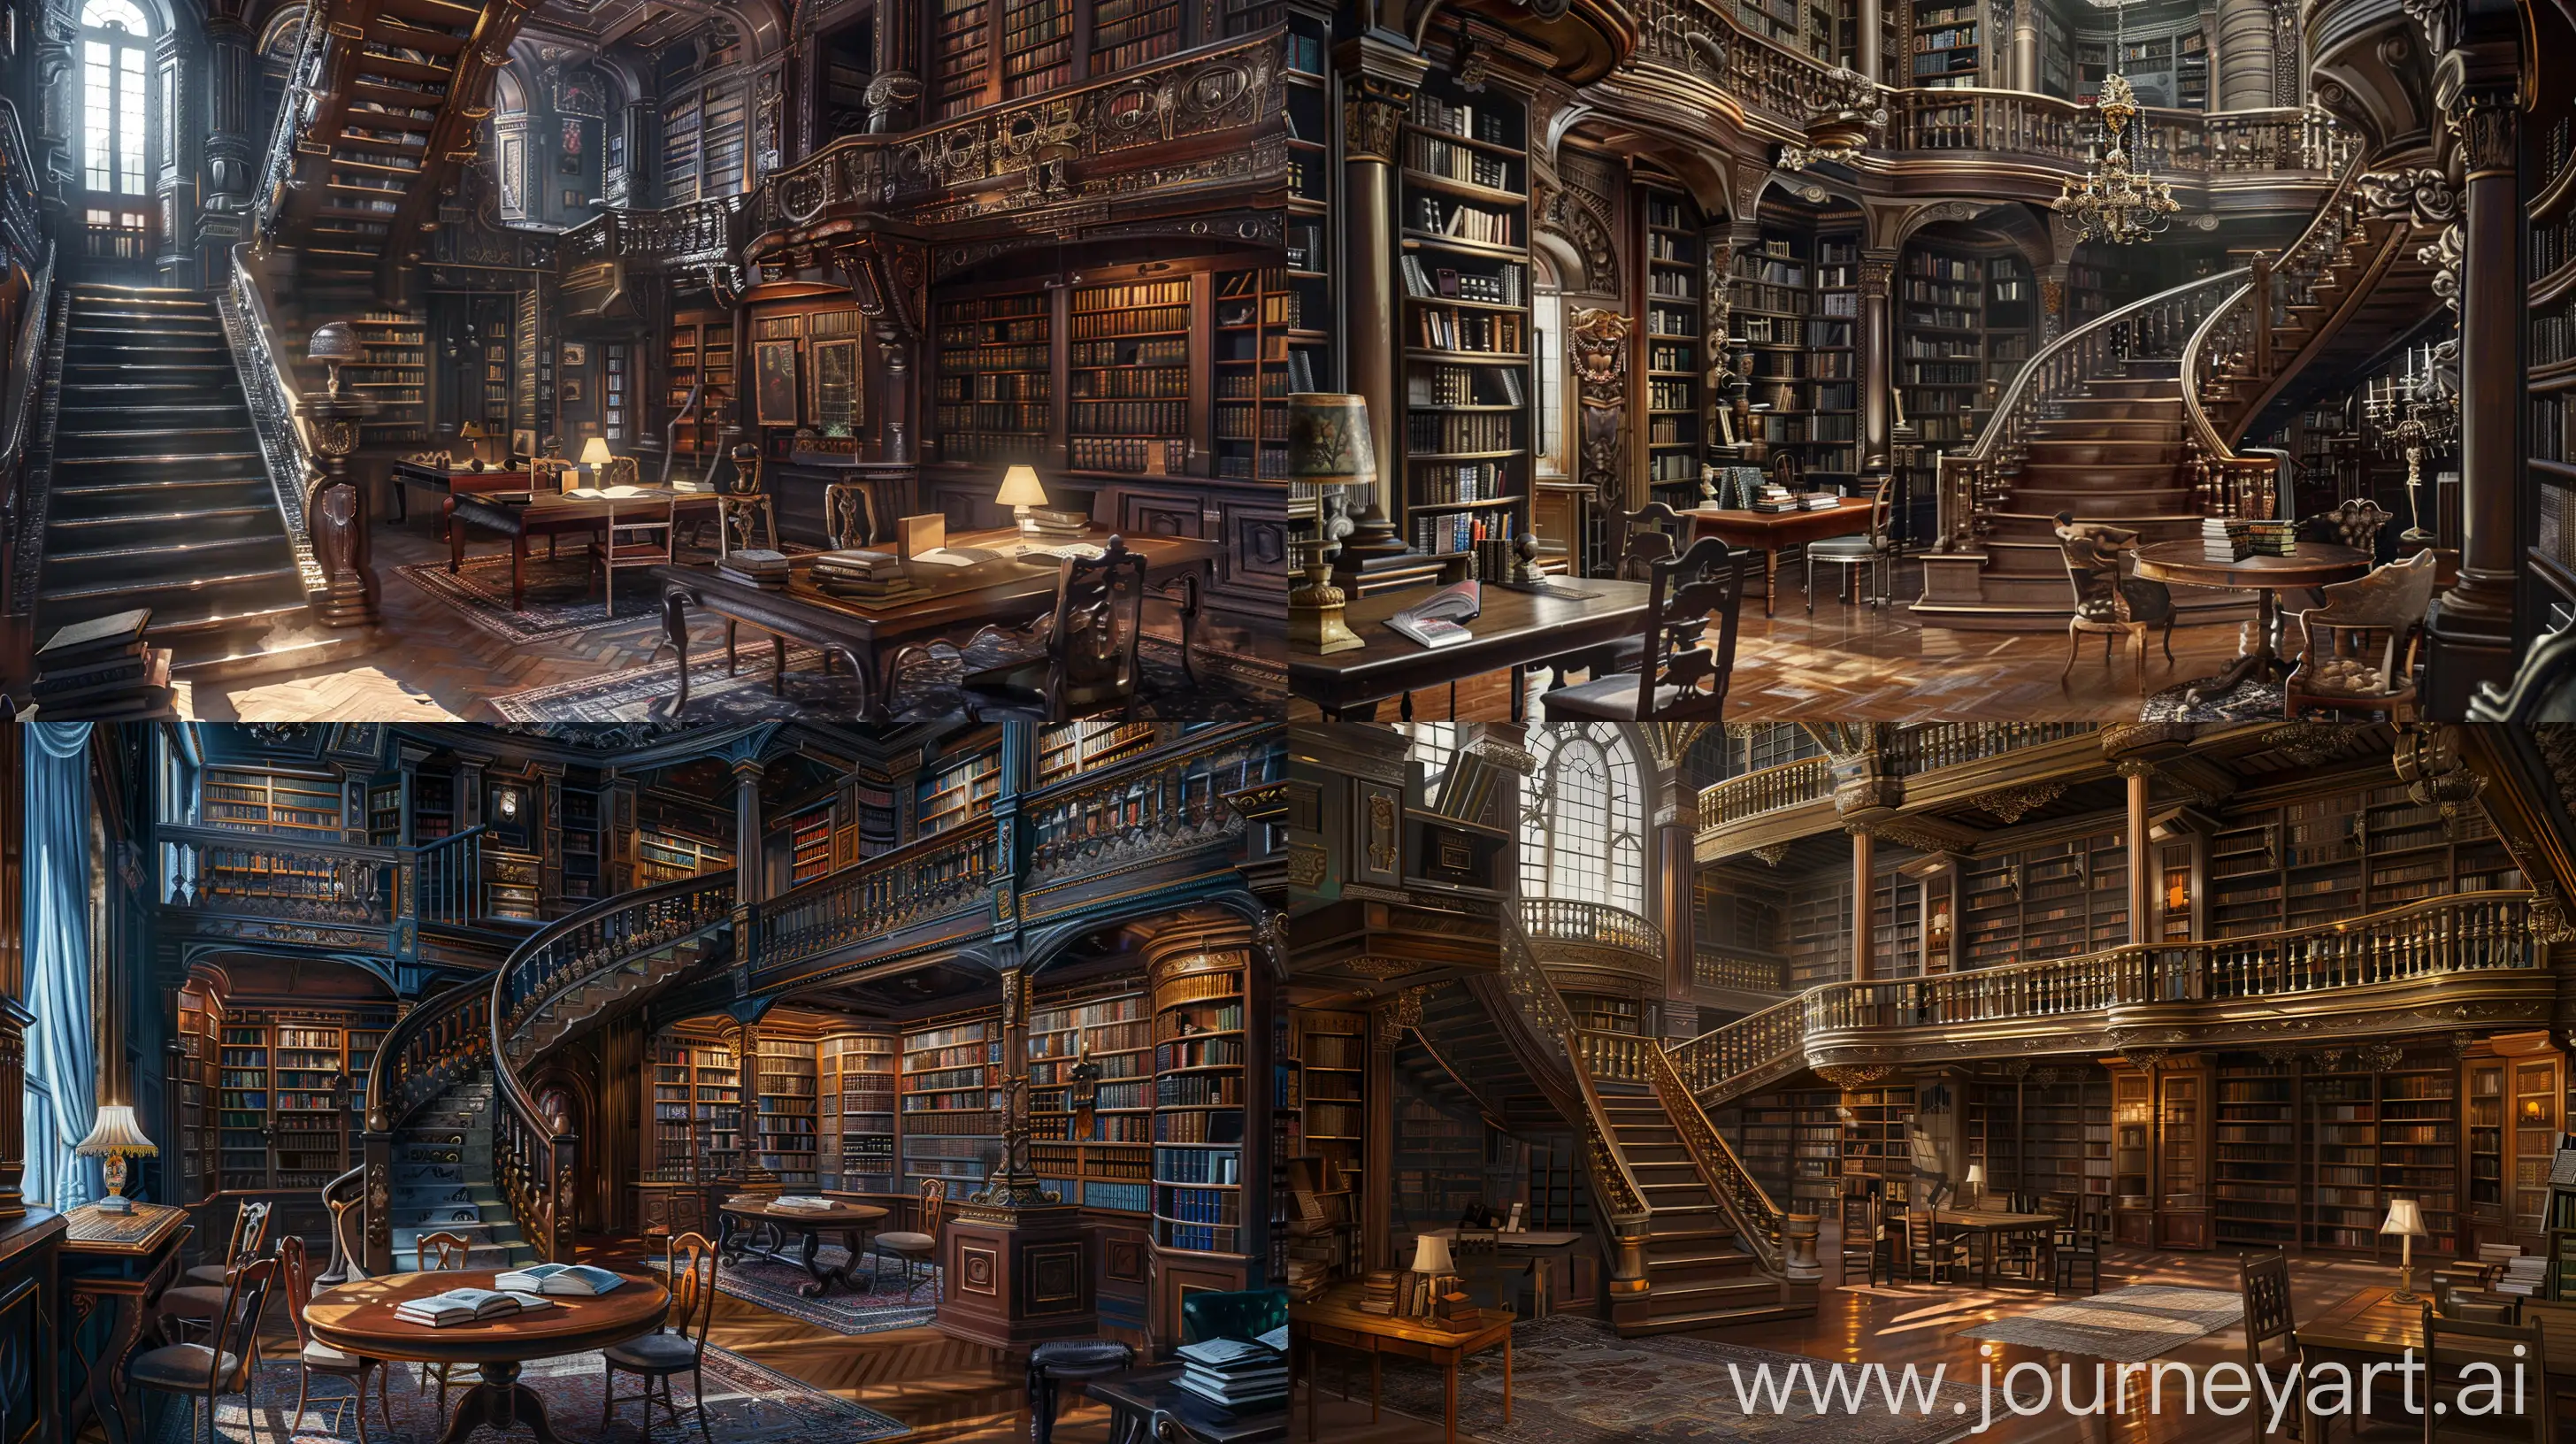 Elegant-BeauxArts-Library-with-Majestic-Wooden-Decor